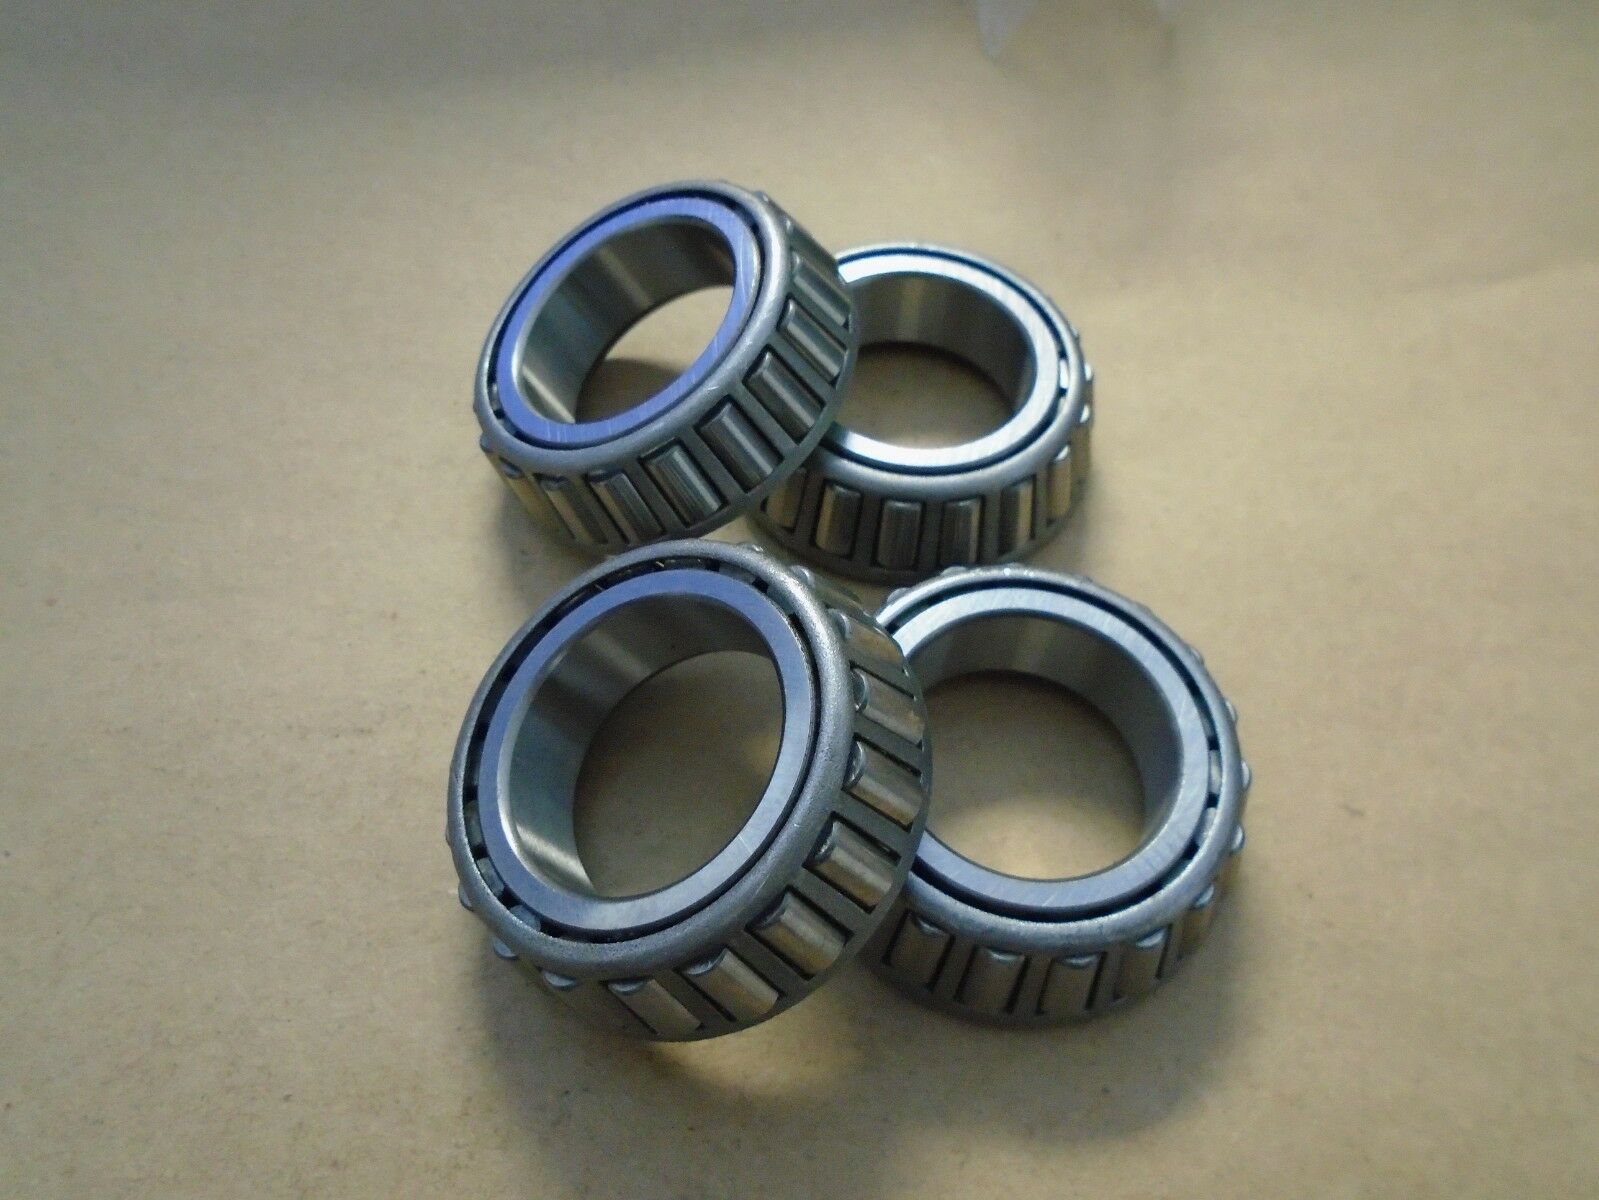 Tapered Roller Bearing LM12749A/LM12711 13686/13620 14124/14274 14125A/1426 14137A/14277 14138A/14277 15100/15243 15101/15244 15103S/15345 15106/15345 15113/15345 15123/15250 15125/15250X